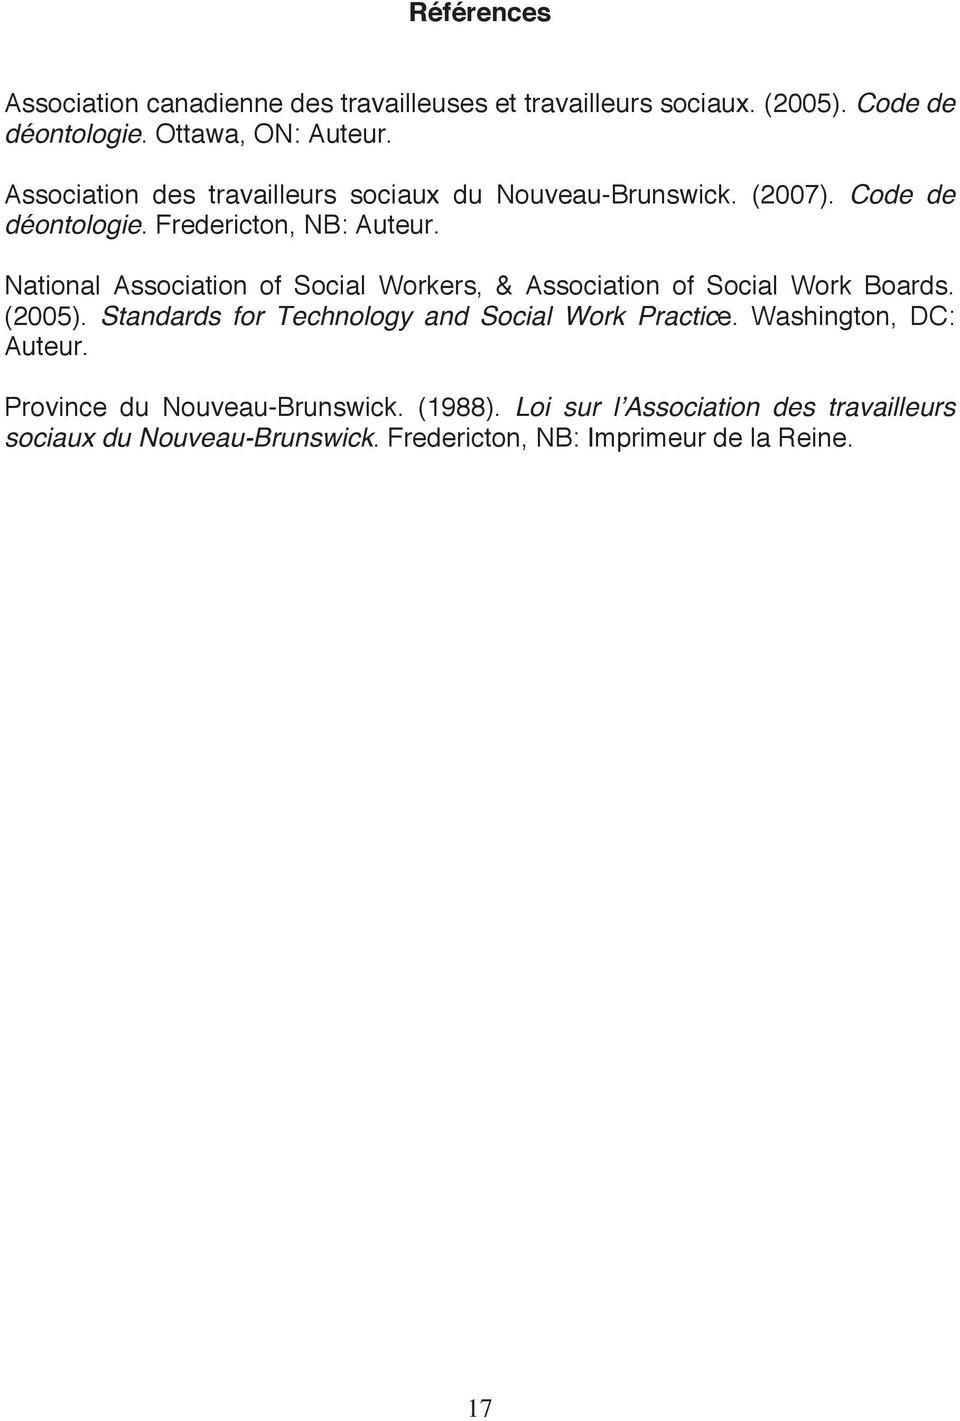 National Association of Social Workers, & Association of Social Work Boards. (2005). Standards for Technology and Social Work Practice.